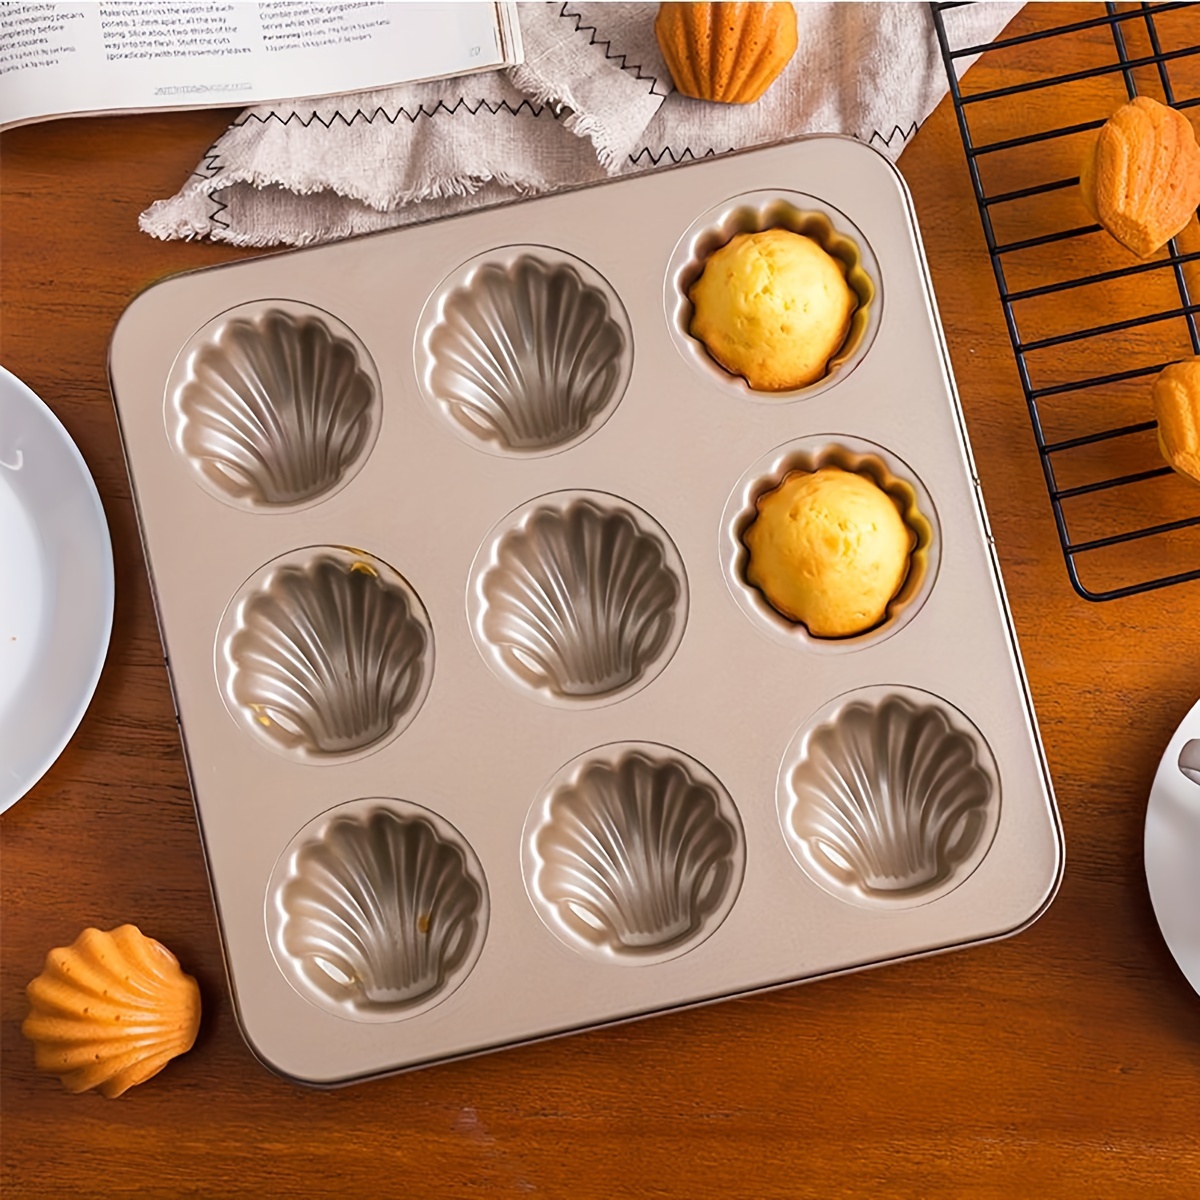 

Madeleine Mold Cake Baking Pan 9-cavity Non-stick Candy Mold Food Grade Carbon Steel Cake Mold Madeleine Pan Shell Shaped Baking Mold For Cookie Cake Chocolate Durable